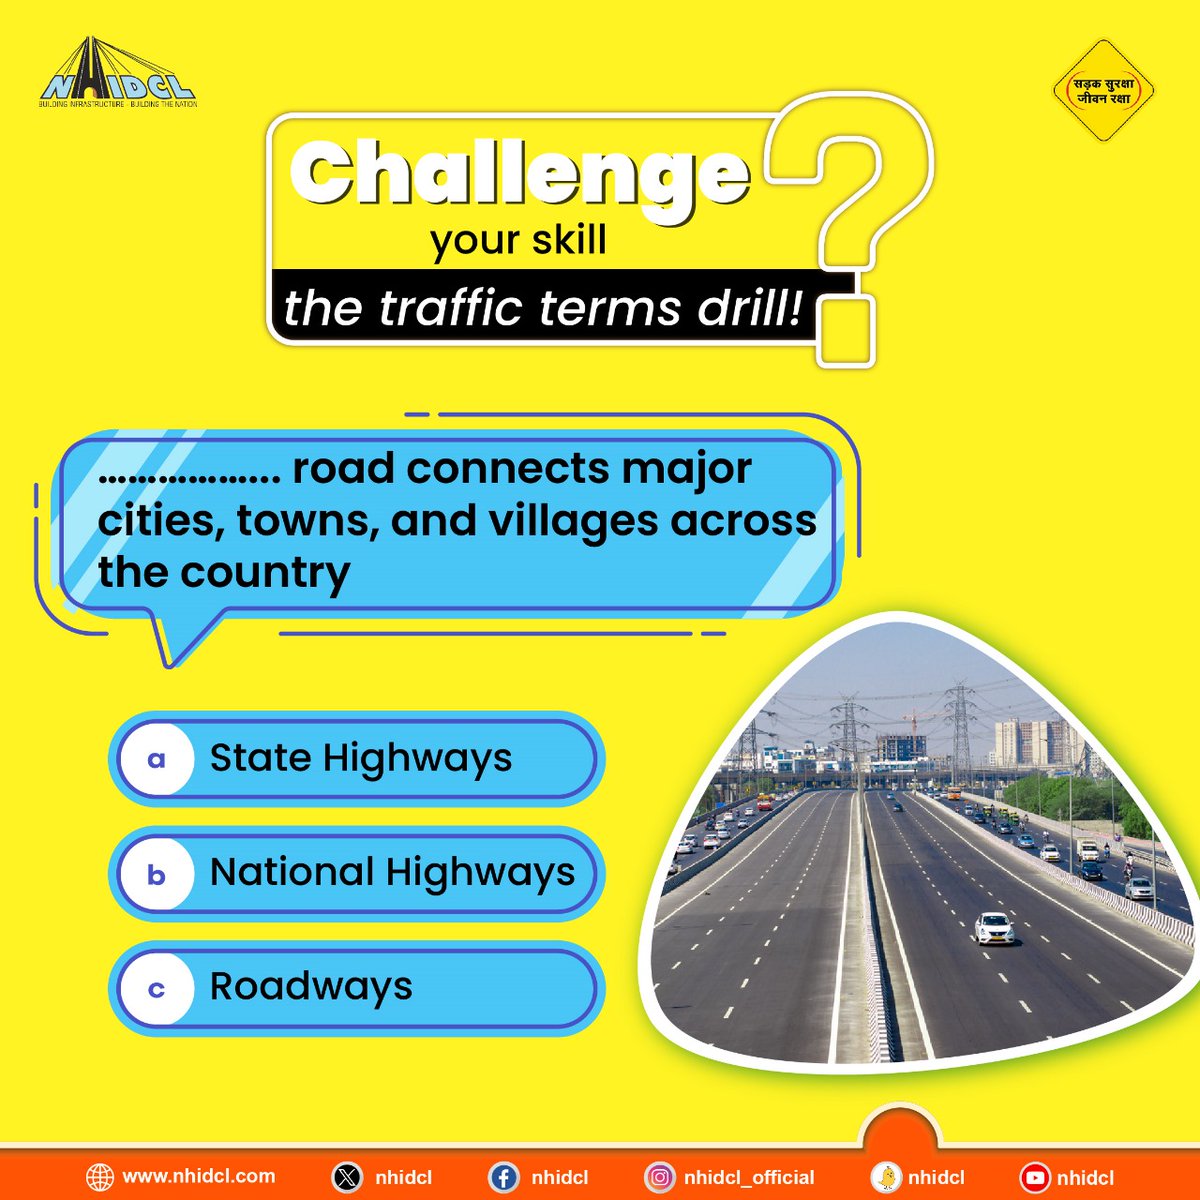 Challenge yourself to identify correct traffic terms. Test your knowledge and comment with the right answer!

#SadakSurakshaJeevanRaksha #RoadSafety #NHIDCL #BuildingInfrastructure #BuildingTheNation